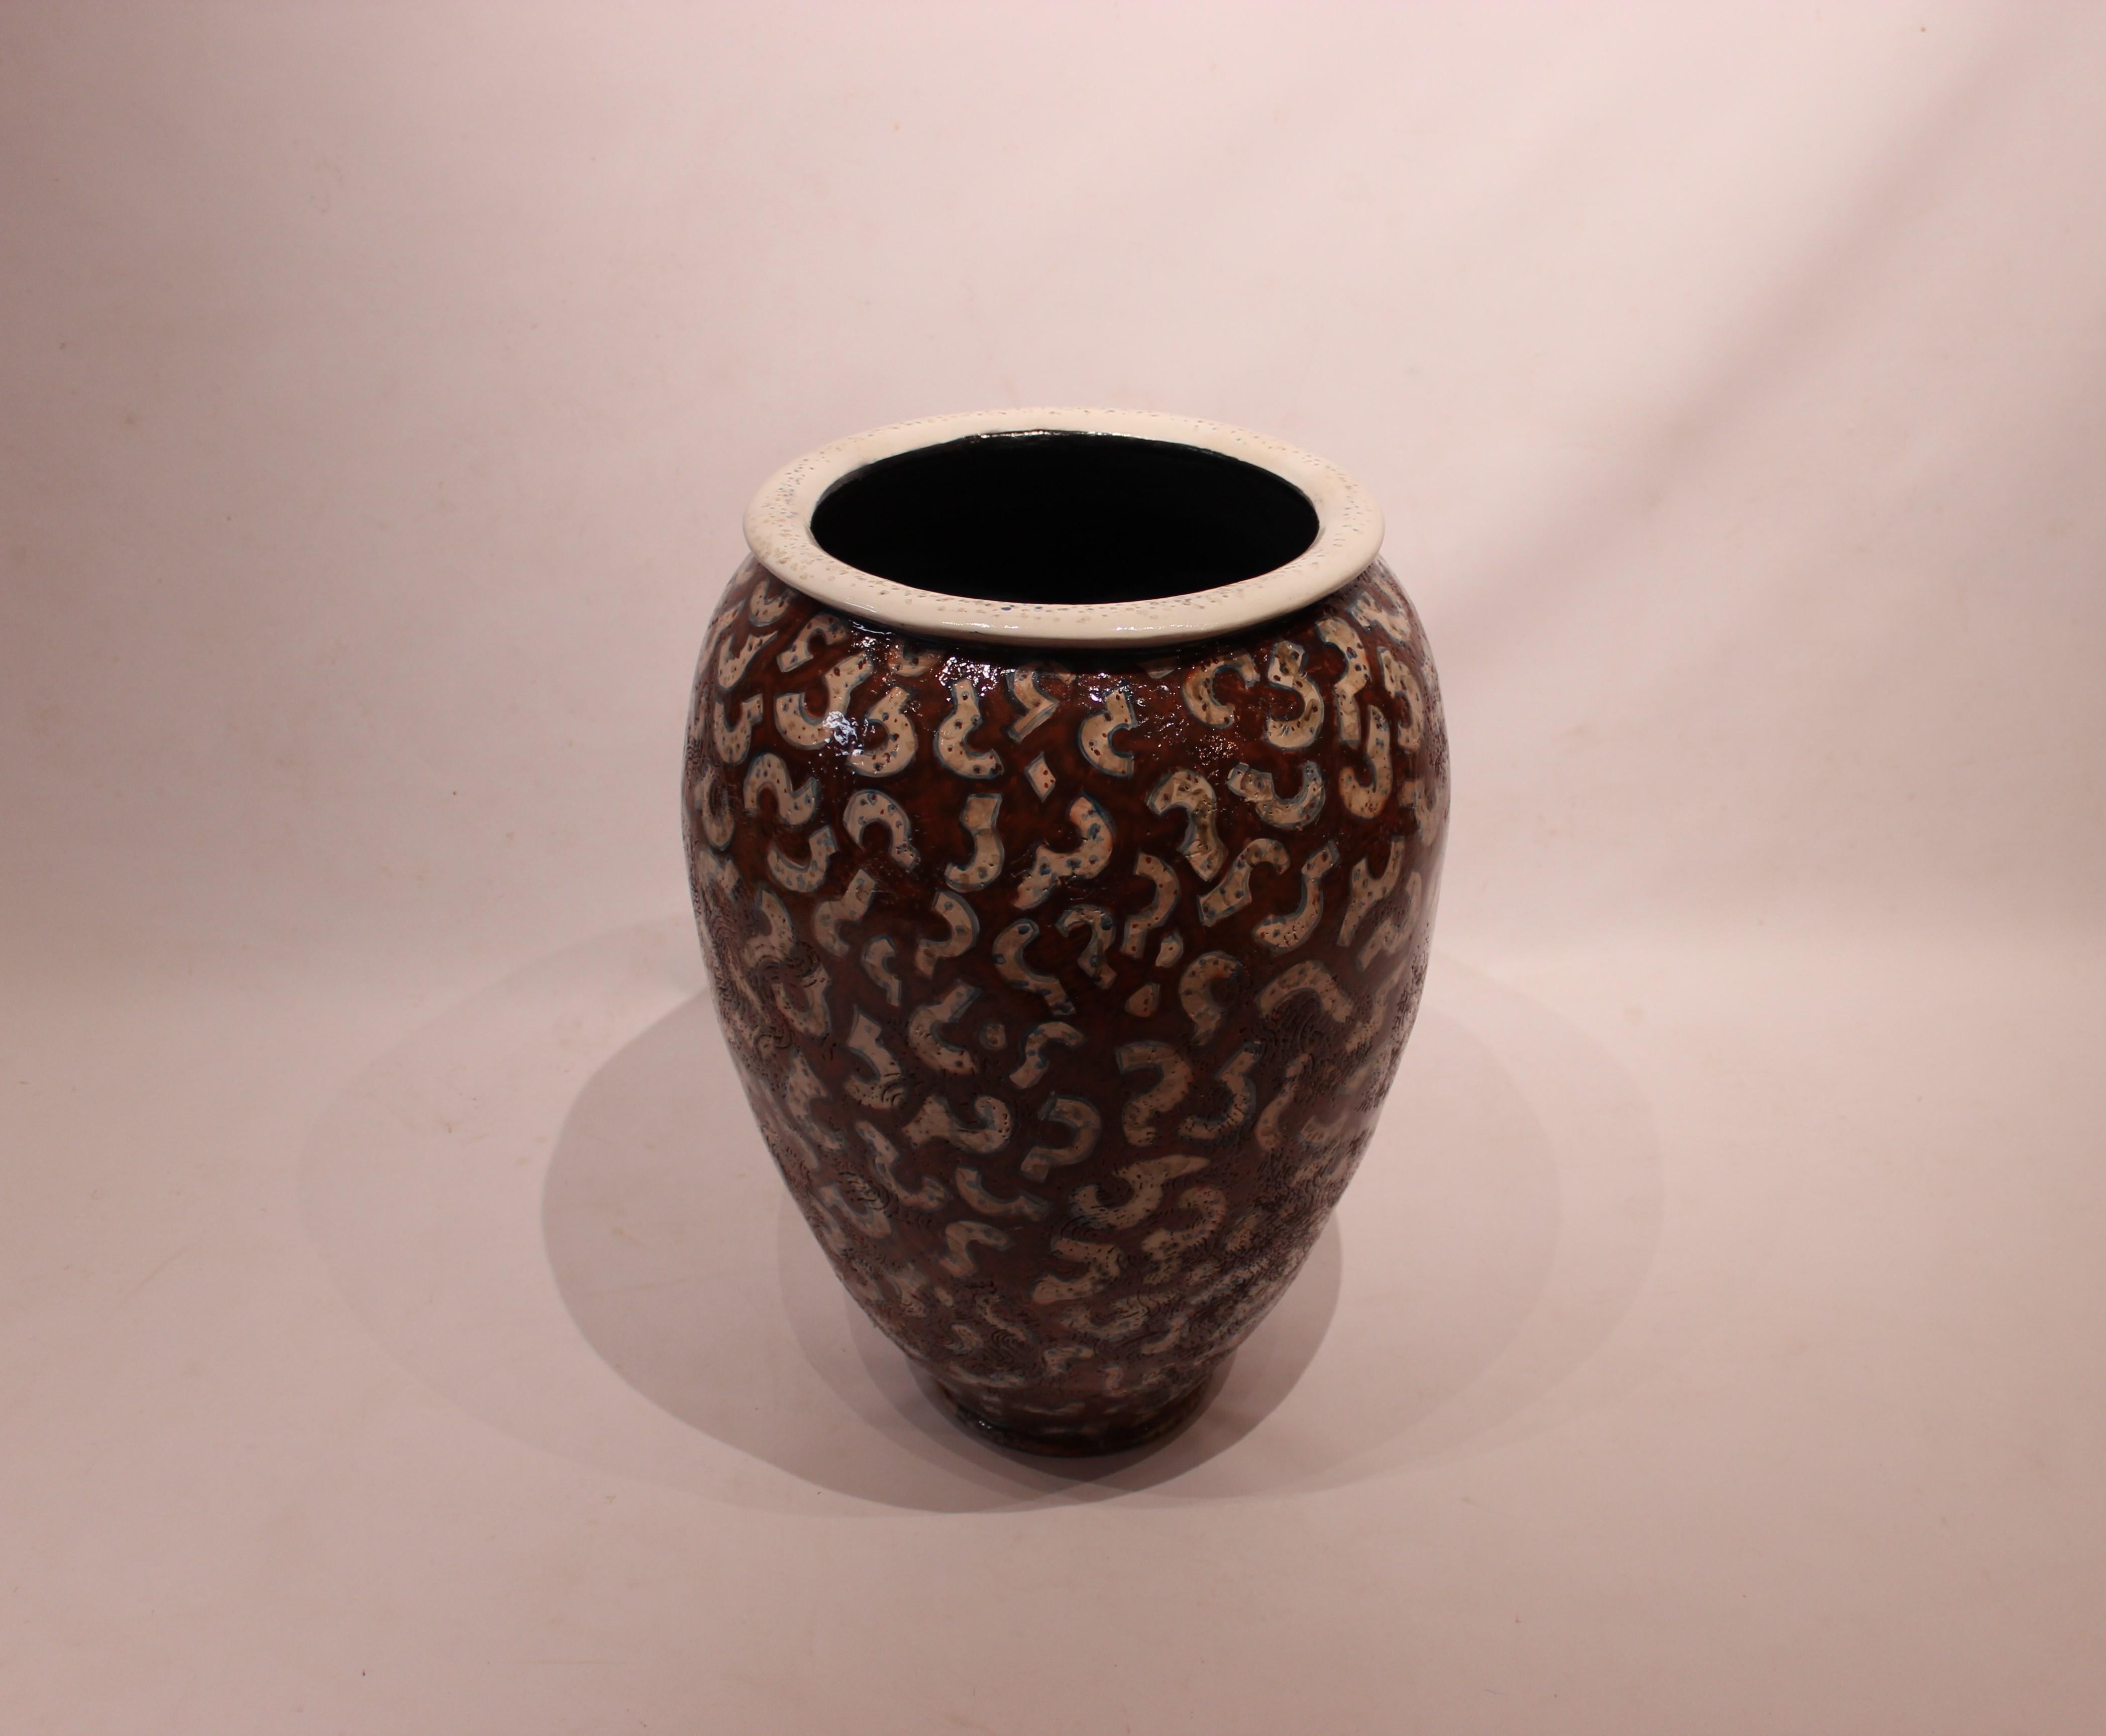 Large stoneware floor vase by the Danish artist Per Weiss from the 1980s. The vase is decorated in dark brown and white glaze, and in great vintage condition.